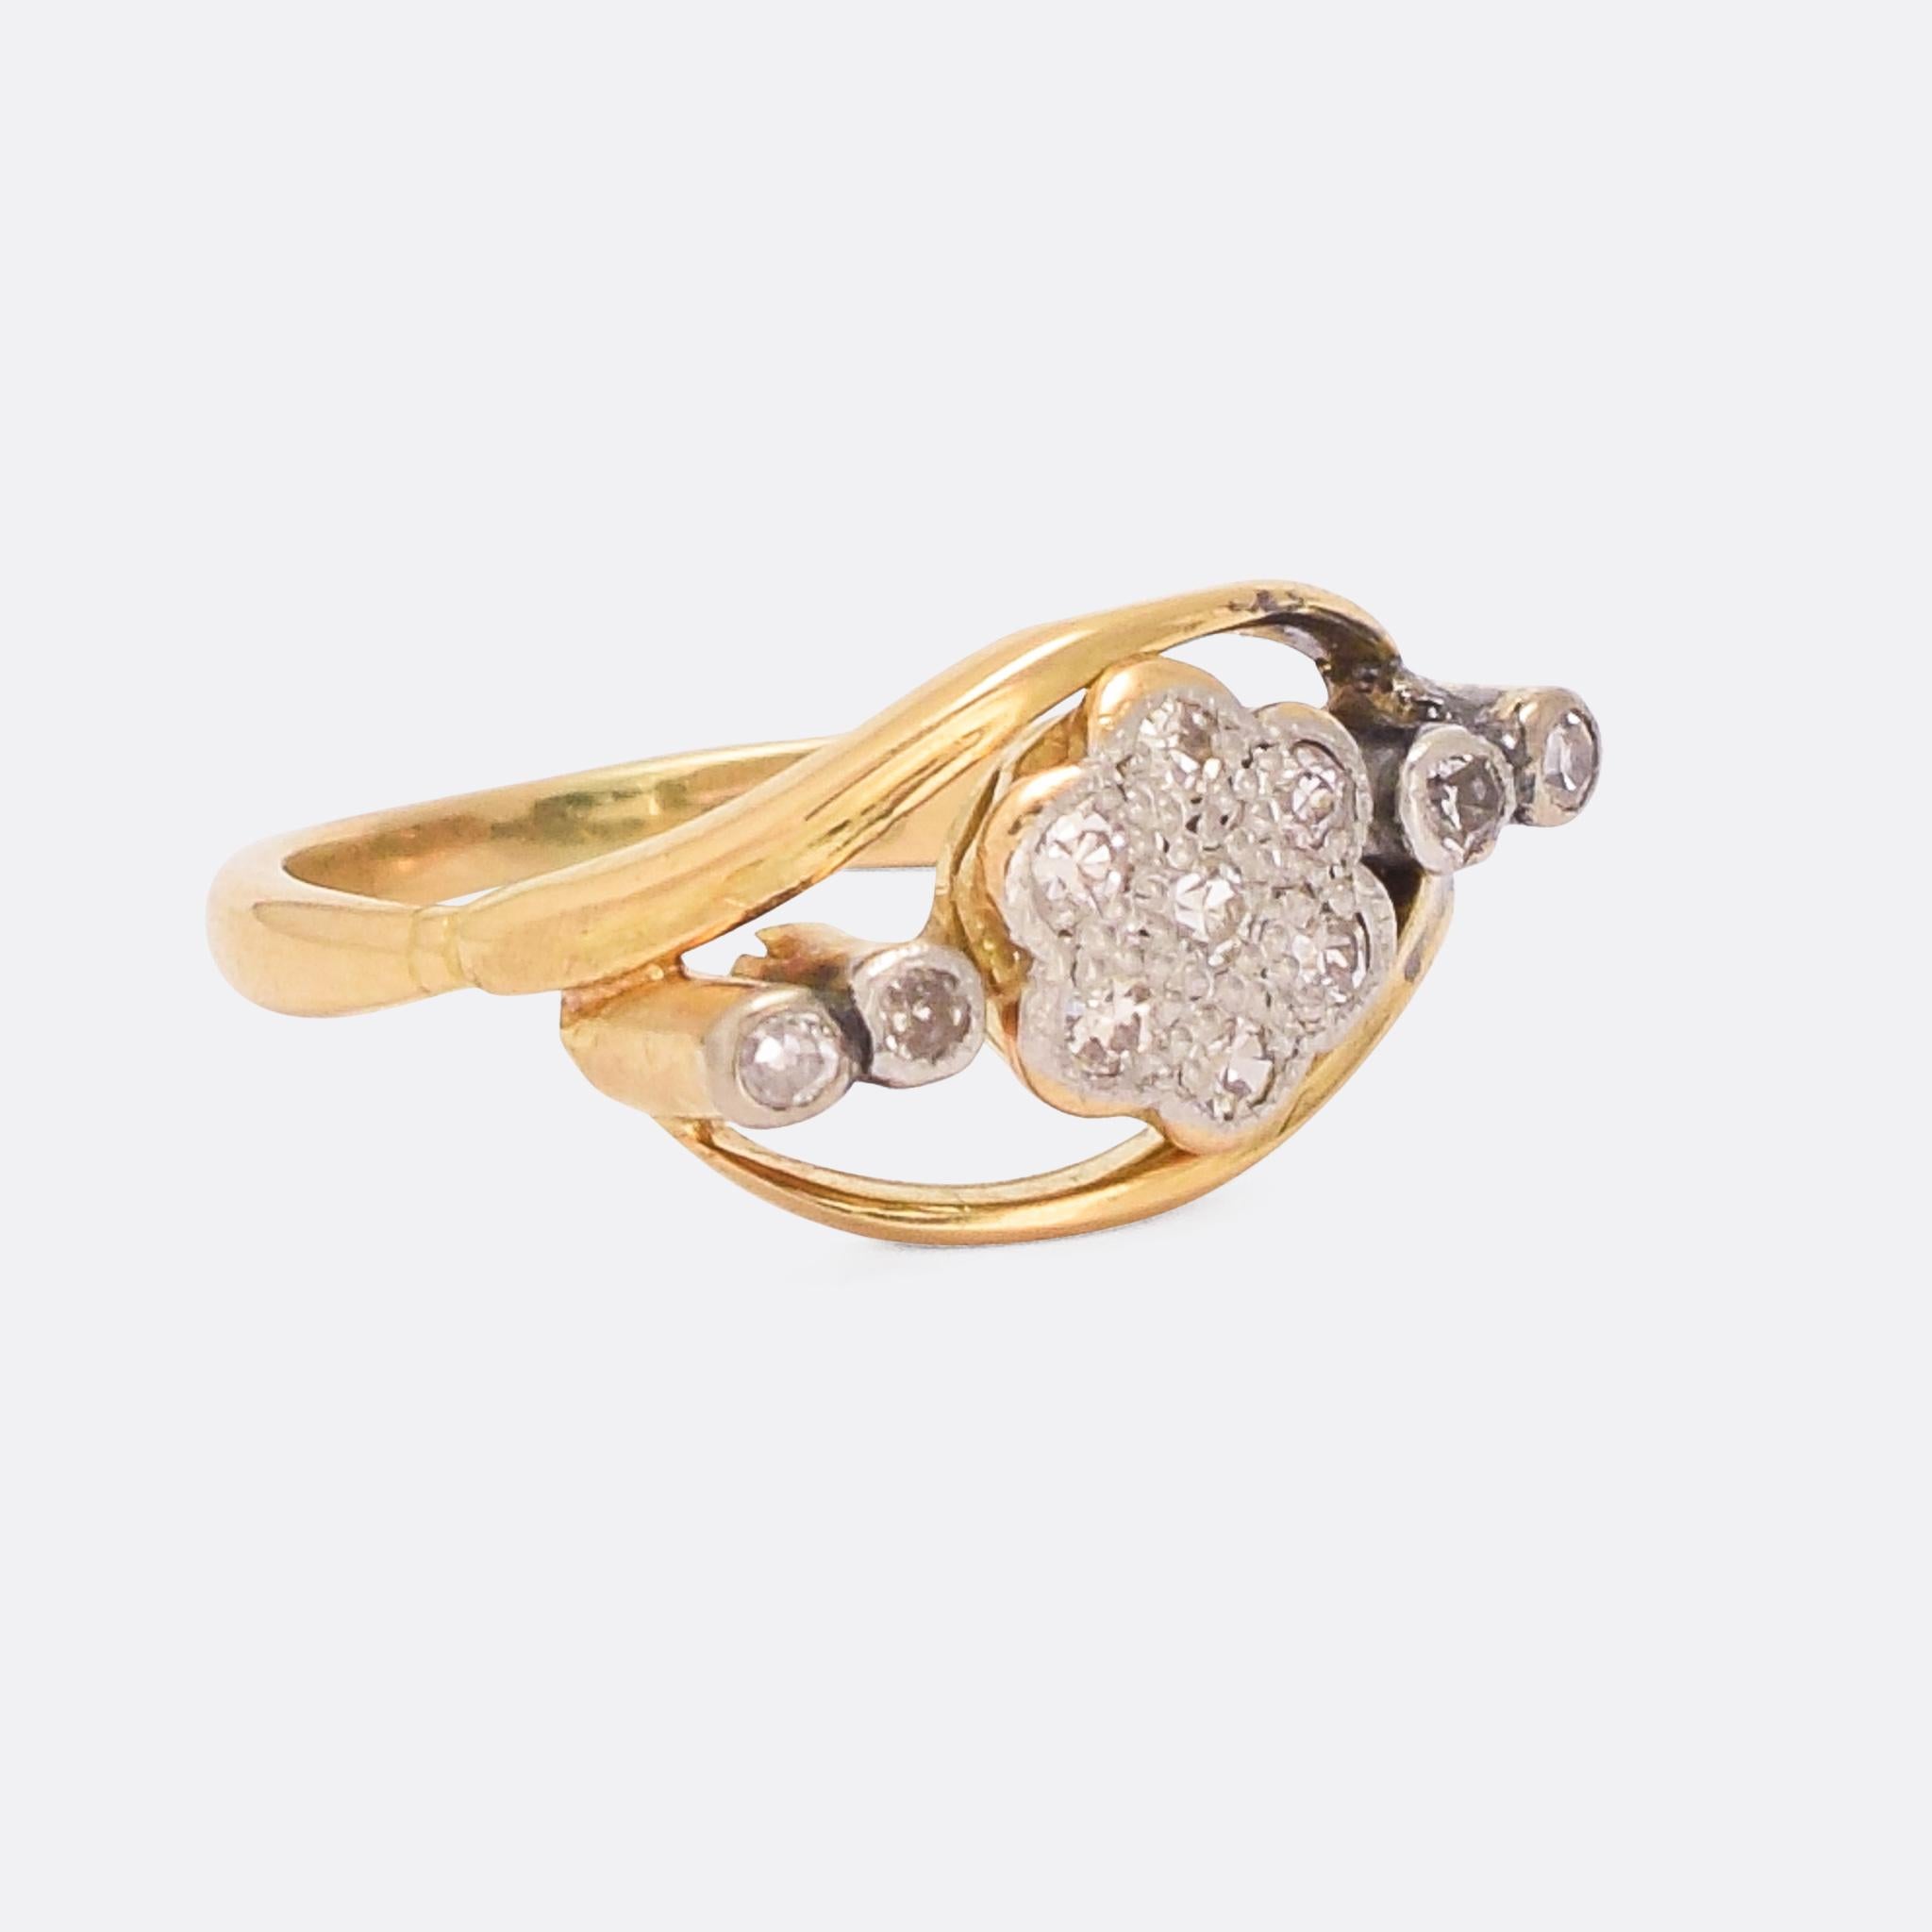 A sweet Art Nouveau crossover ring dating from the early 20th Century. The head features a diamond daisy cluster, with two diamond accents to either side and flowing shoulders that continue all the way around. It's crafted in 18 karat gold and